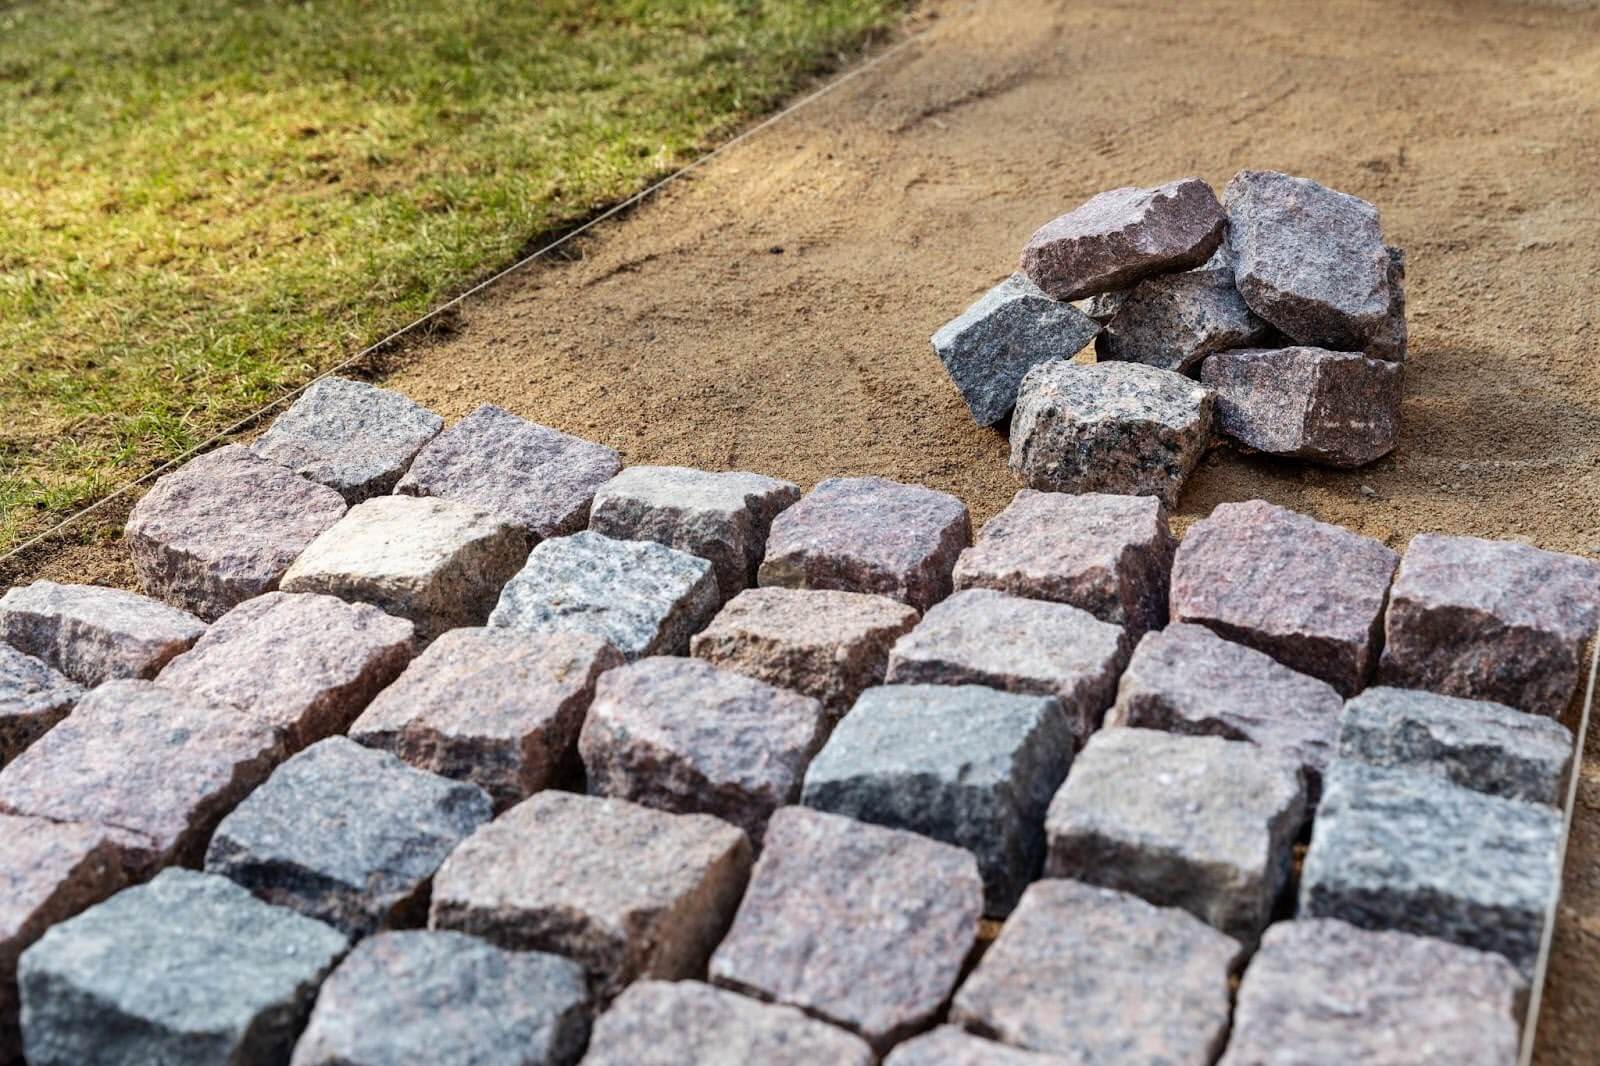 Paving stones on a pathway.